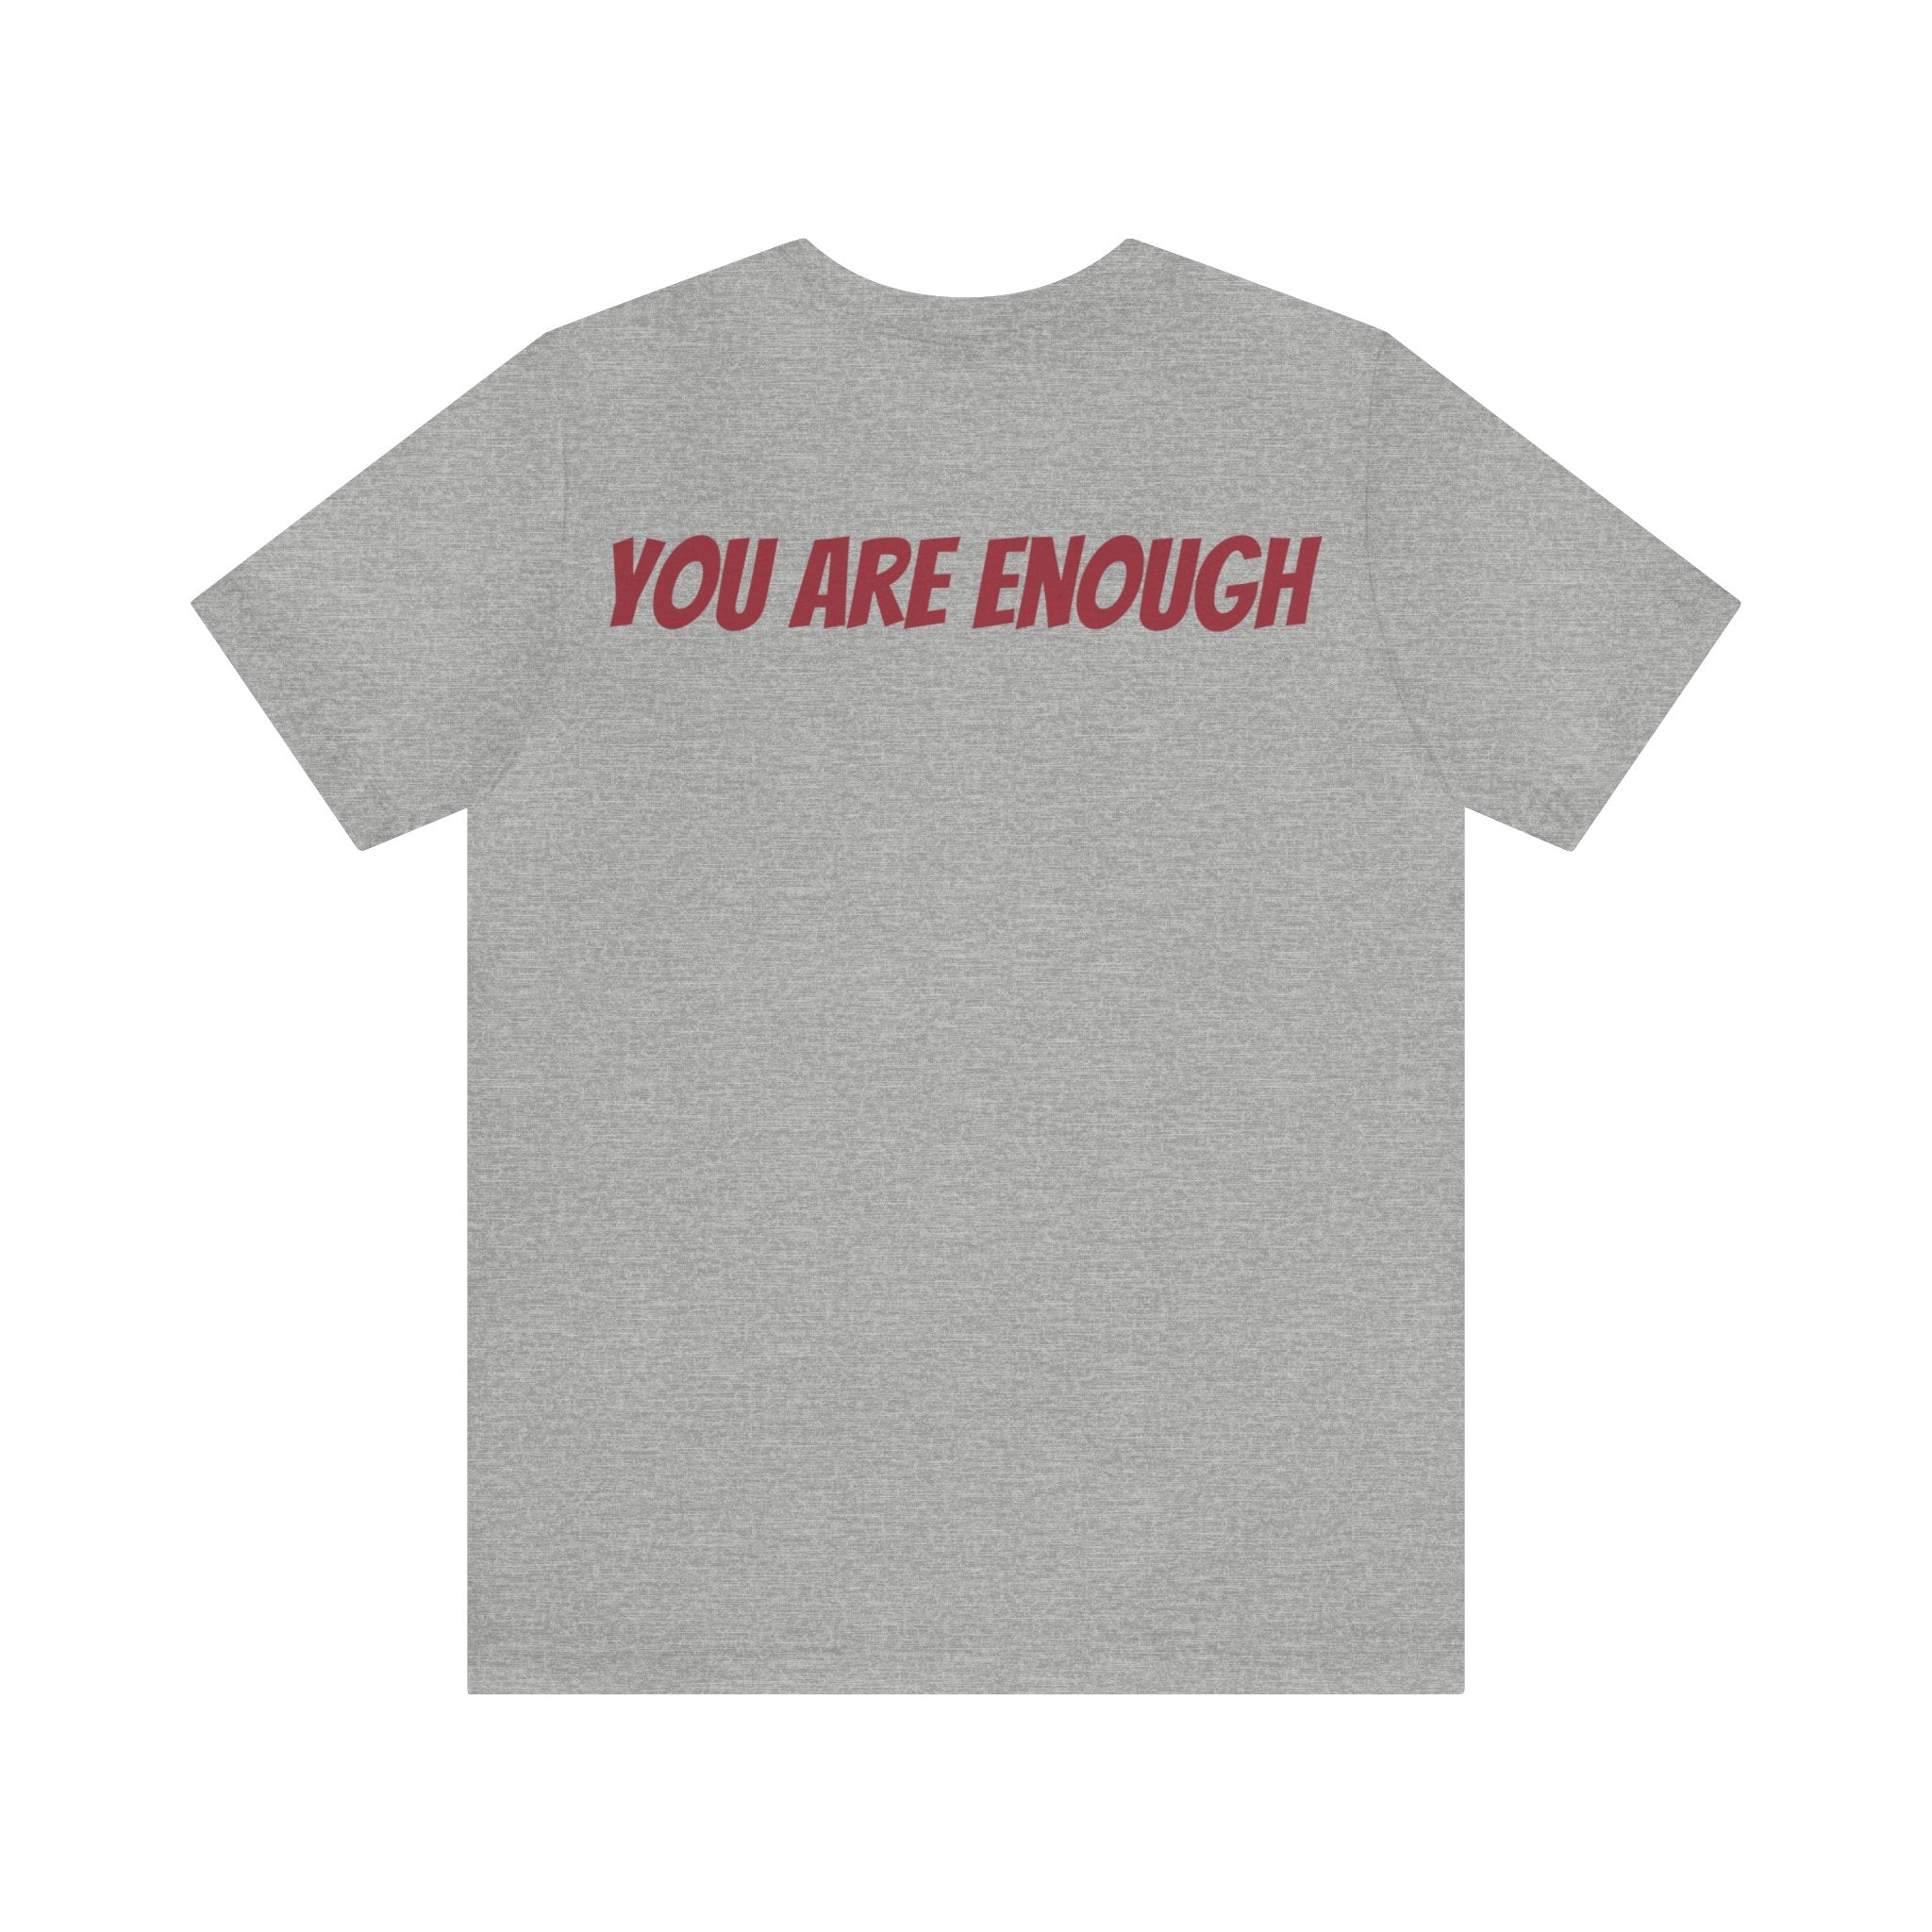 You Are Enough Short Sleeve Tee Bella+Canvas 3001 Heather Mauve Airlume Cotton Bella+Canvas 3001 Crew Neckline Jersey Short Sleeve Lightweight Fabric Mental Health Support Retail Fit Tear-away Label Tee Unisex Tee T-Shirt 2387921961003687575_2048 Printify